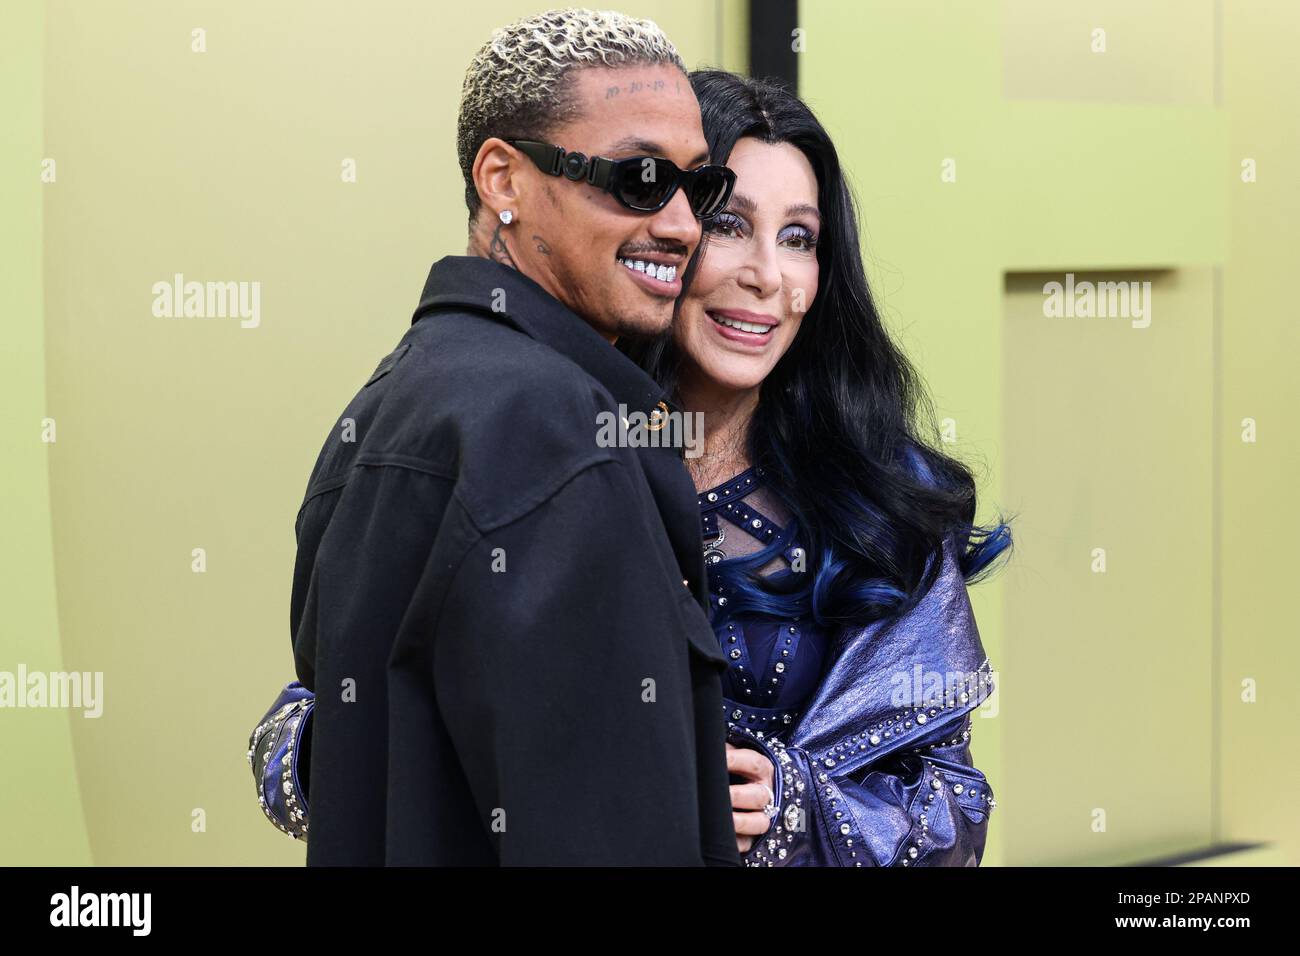 WEST HOLLYWOOD, LOS ANGELES, CALIFORNIA, USA - MARCH 09: American rapper Alexander Edwards and girlfriend/American singer, actress and television personality Cher (Cherilyn Sarkisian) arrive at the Versace Fall/Winter 2023 Fashion Show held at the Pacific Design Center on March 9, 2023 in West Hollywood, Los Angeles, California, United States. (Photo by Xavier Collin/Image Press Agency) Stock Photo